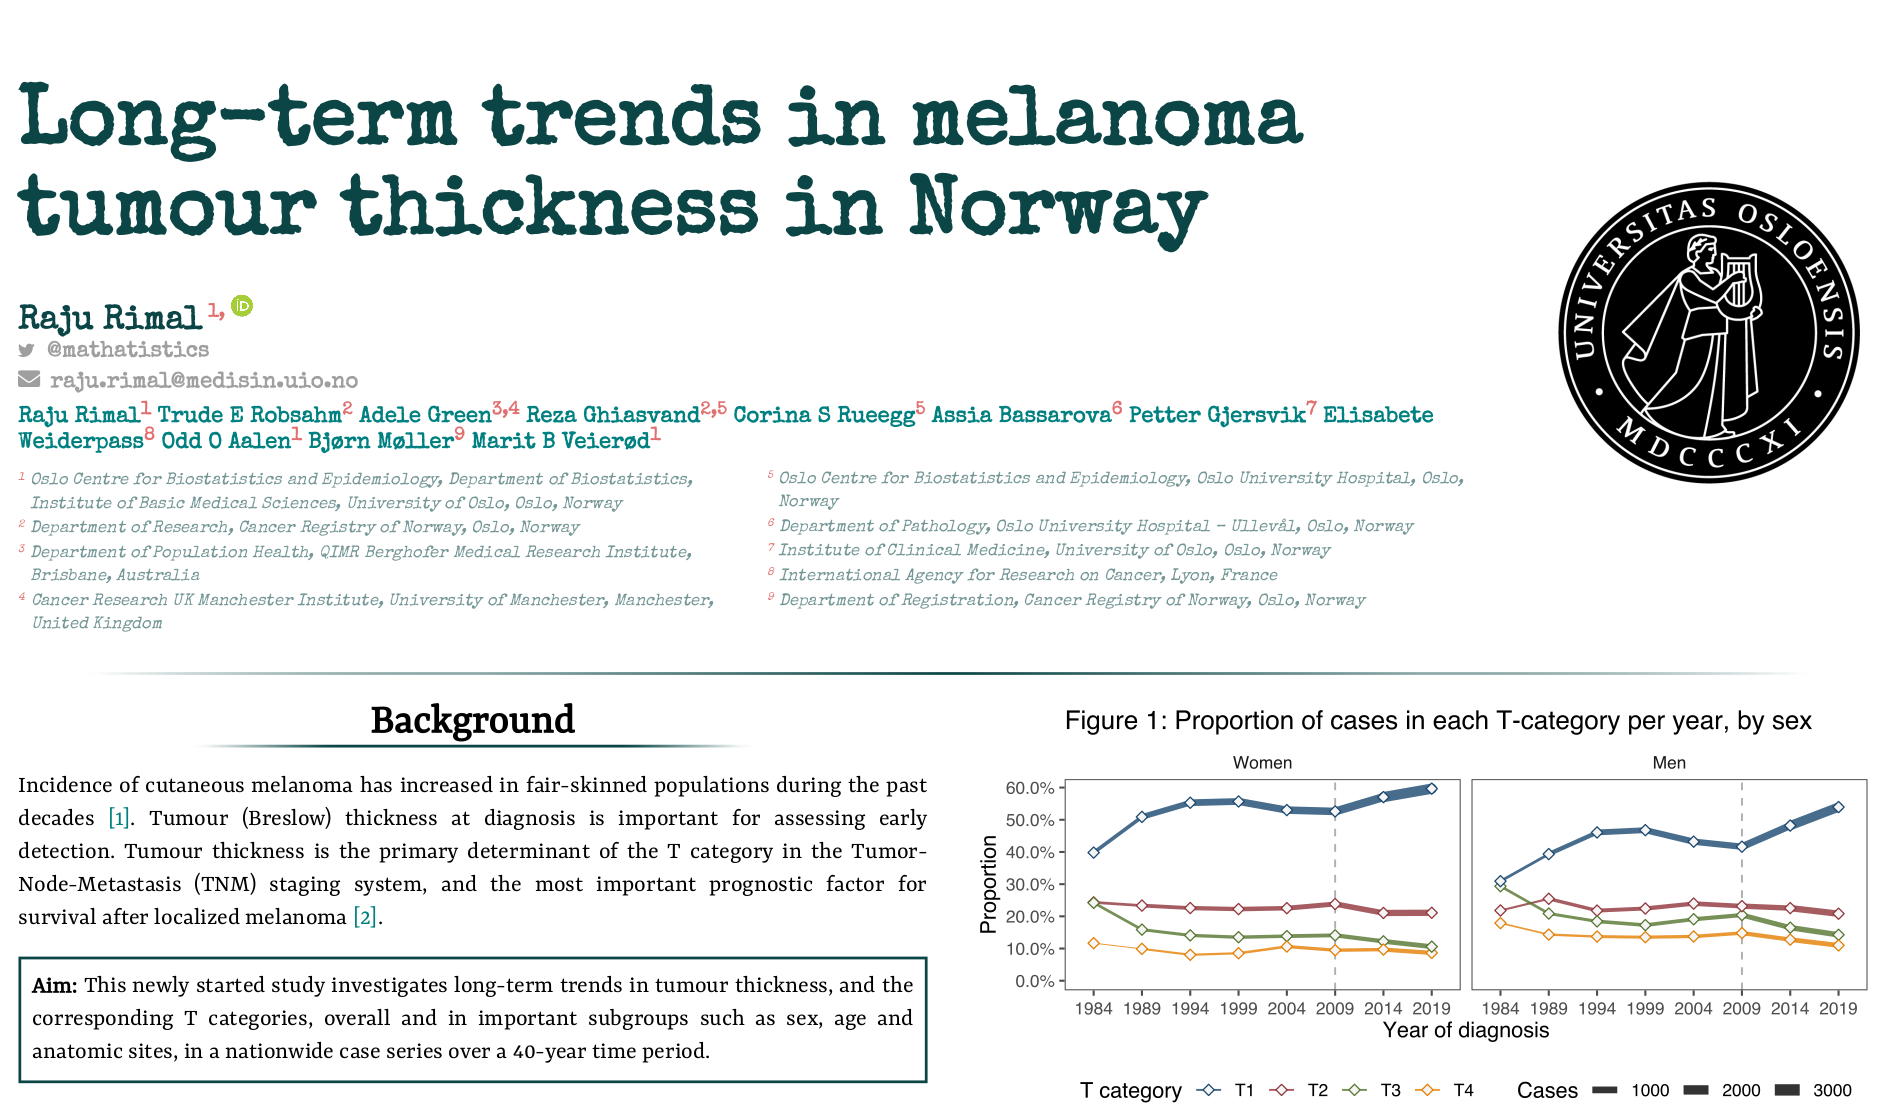 Long-term trend in melanoma tumour thickness in Norway